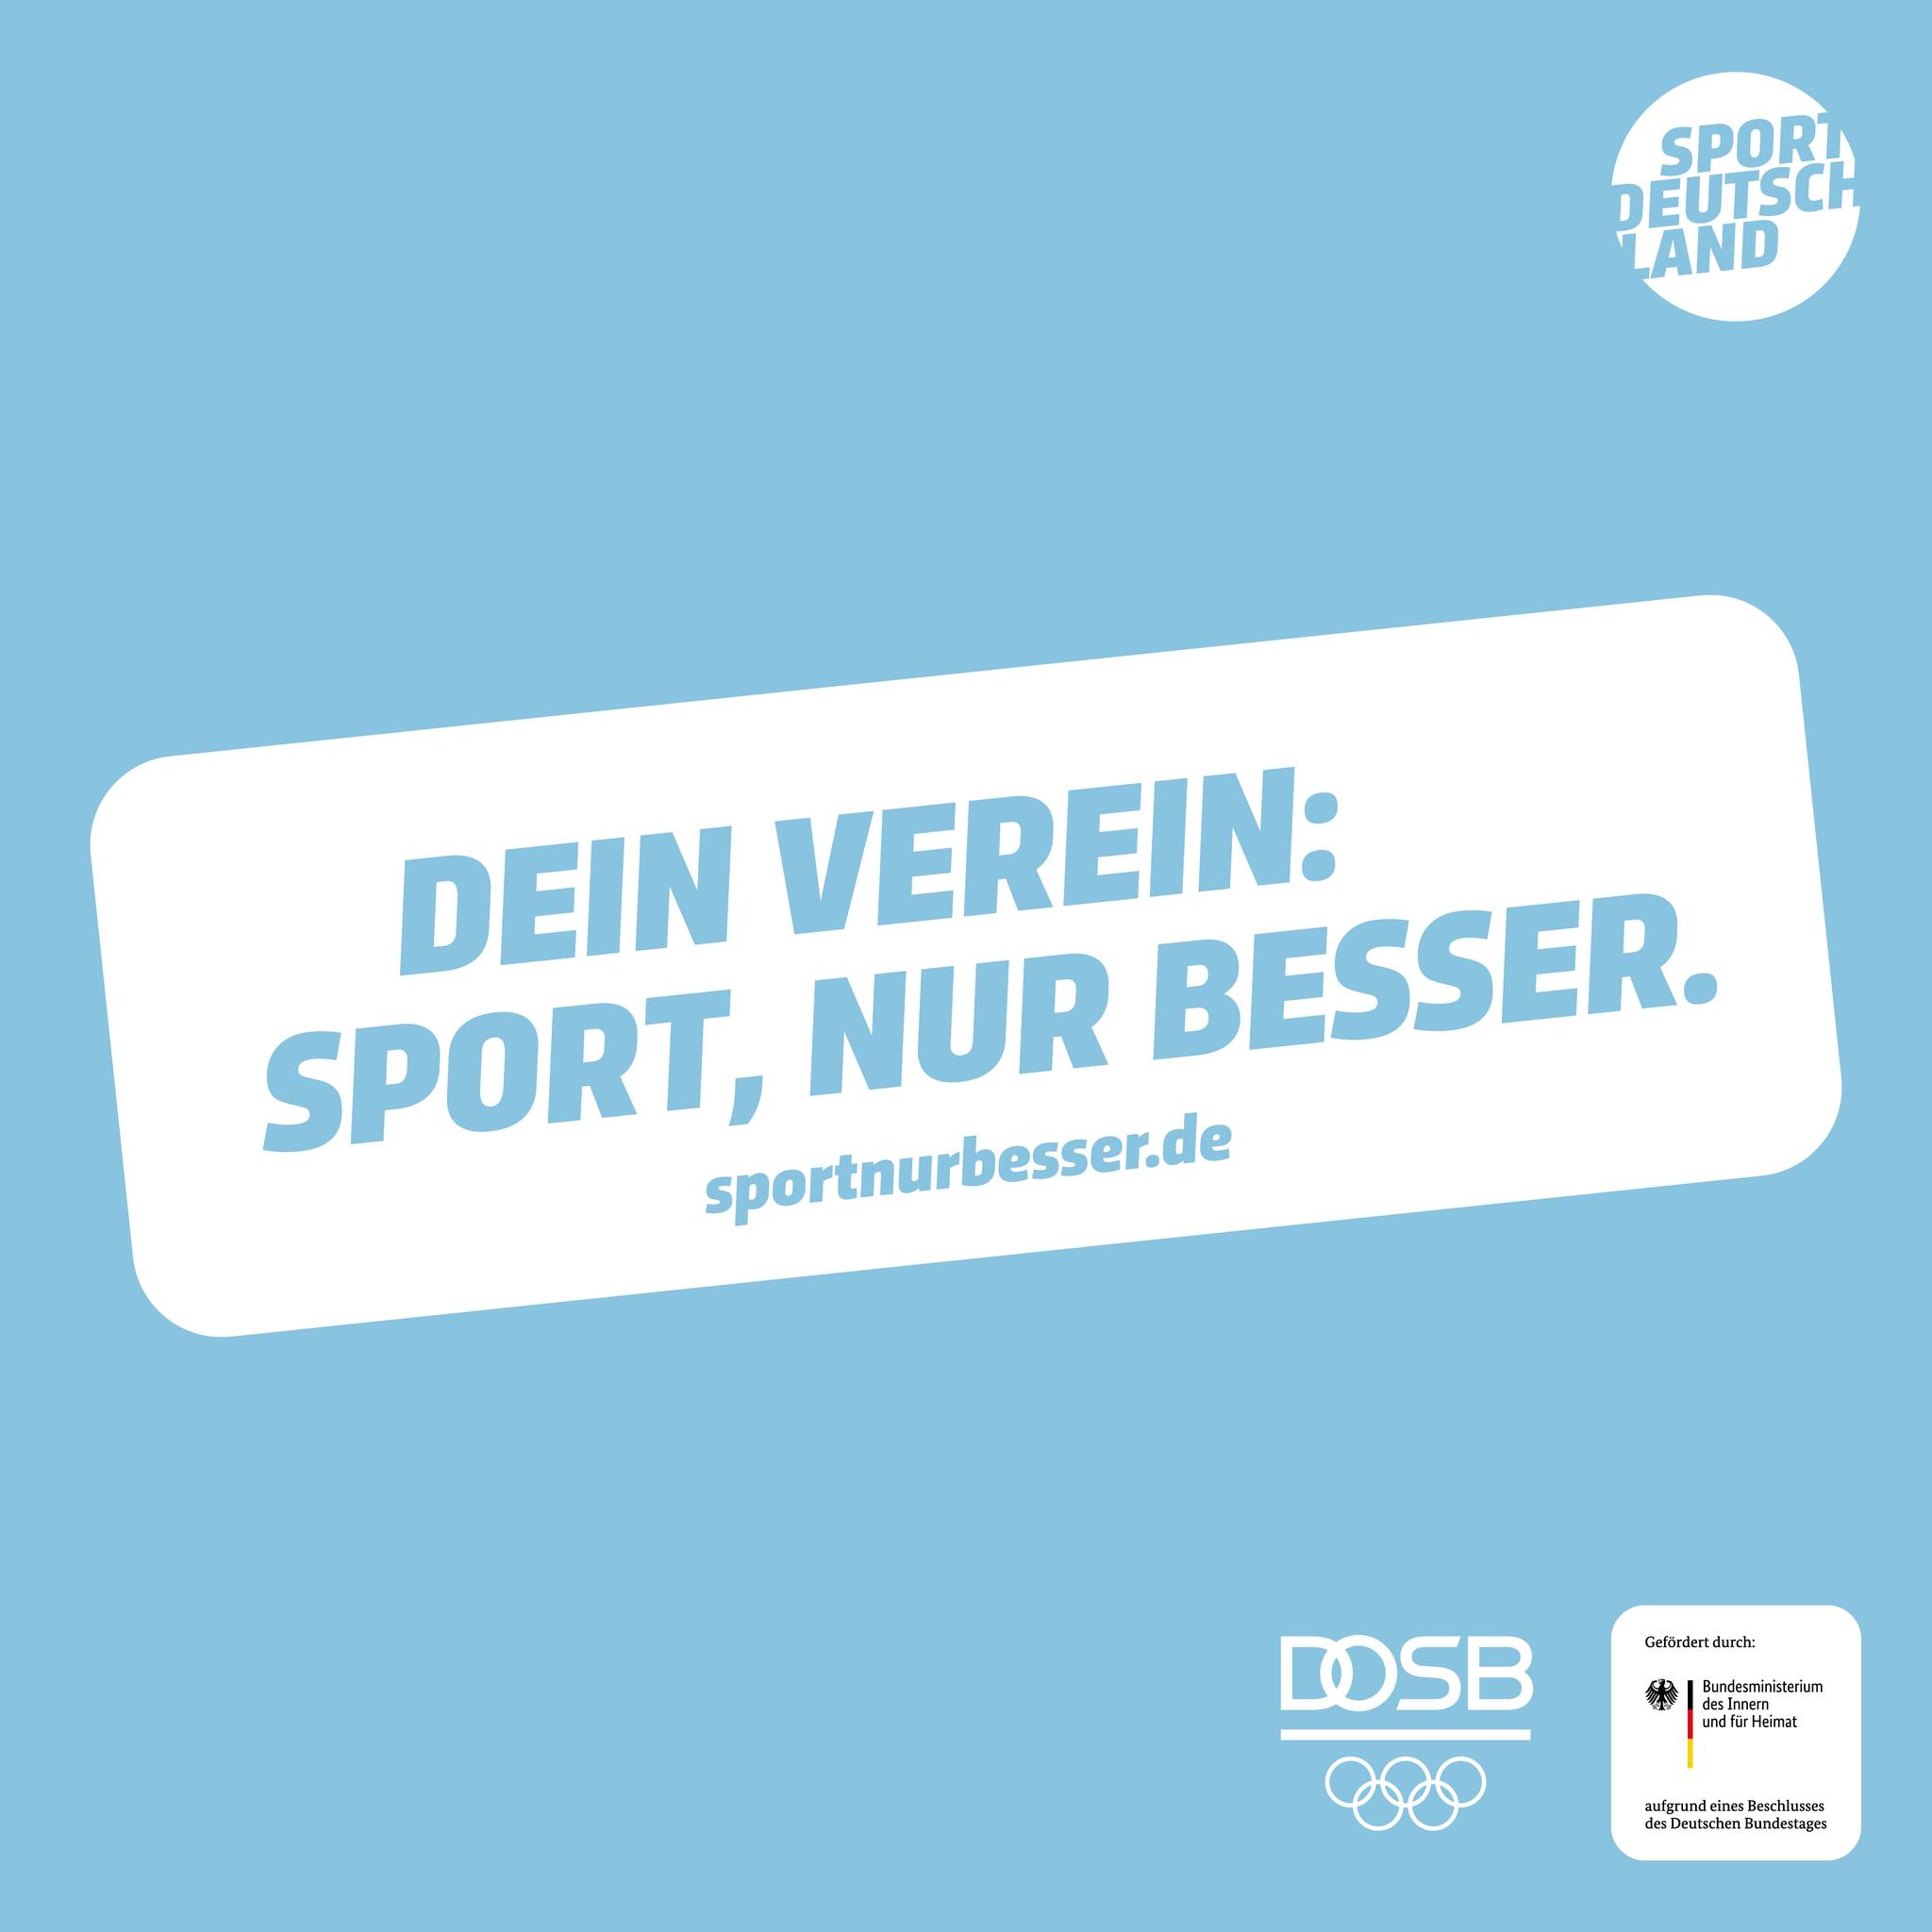 Featured image for “Ab in den Sportverein!”